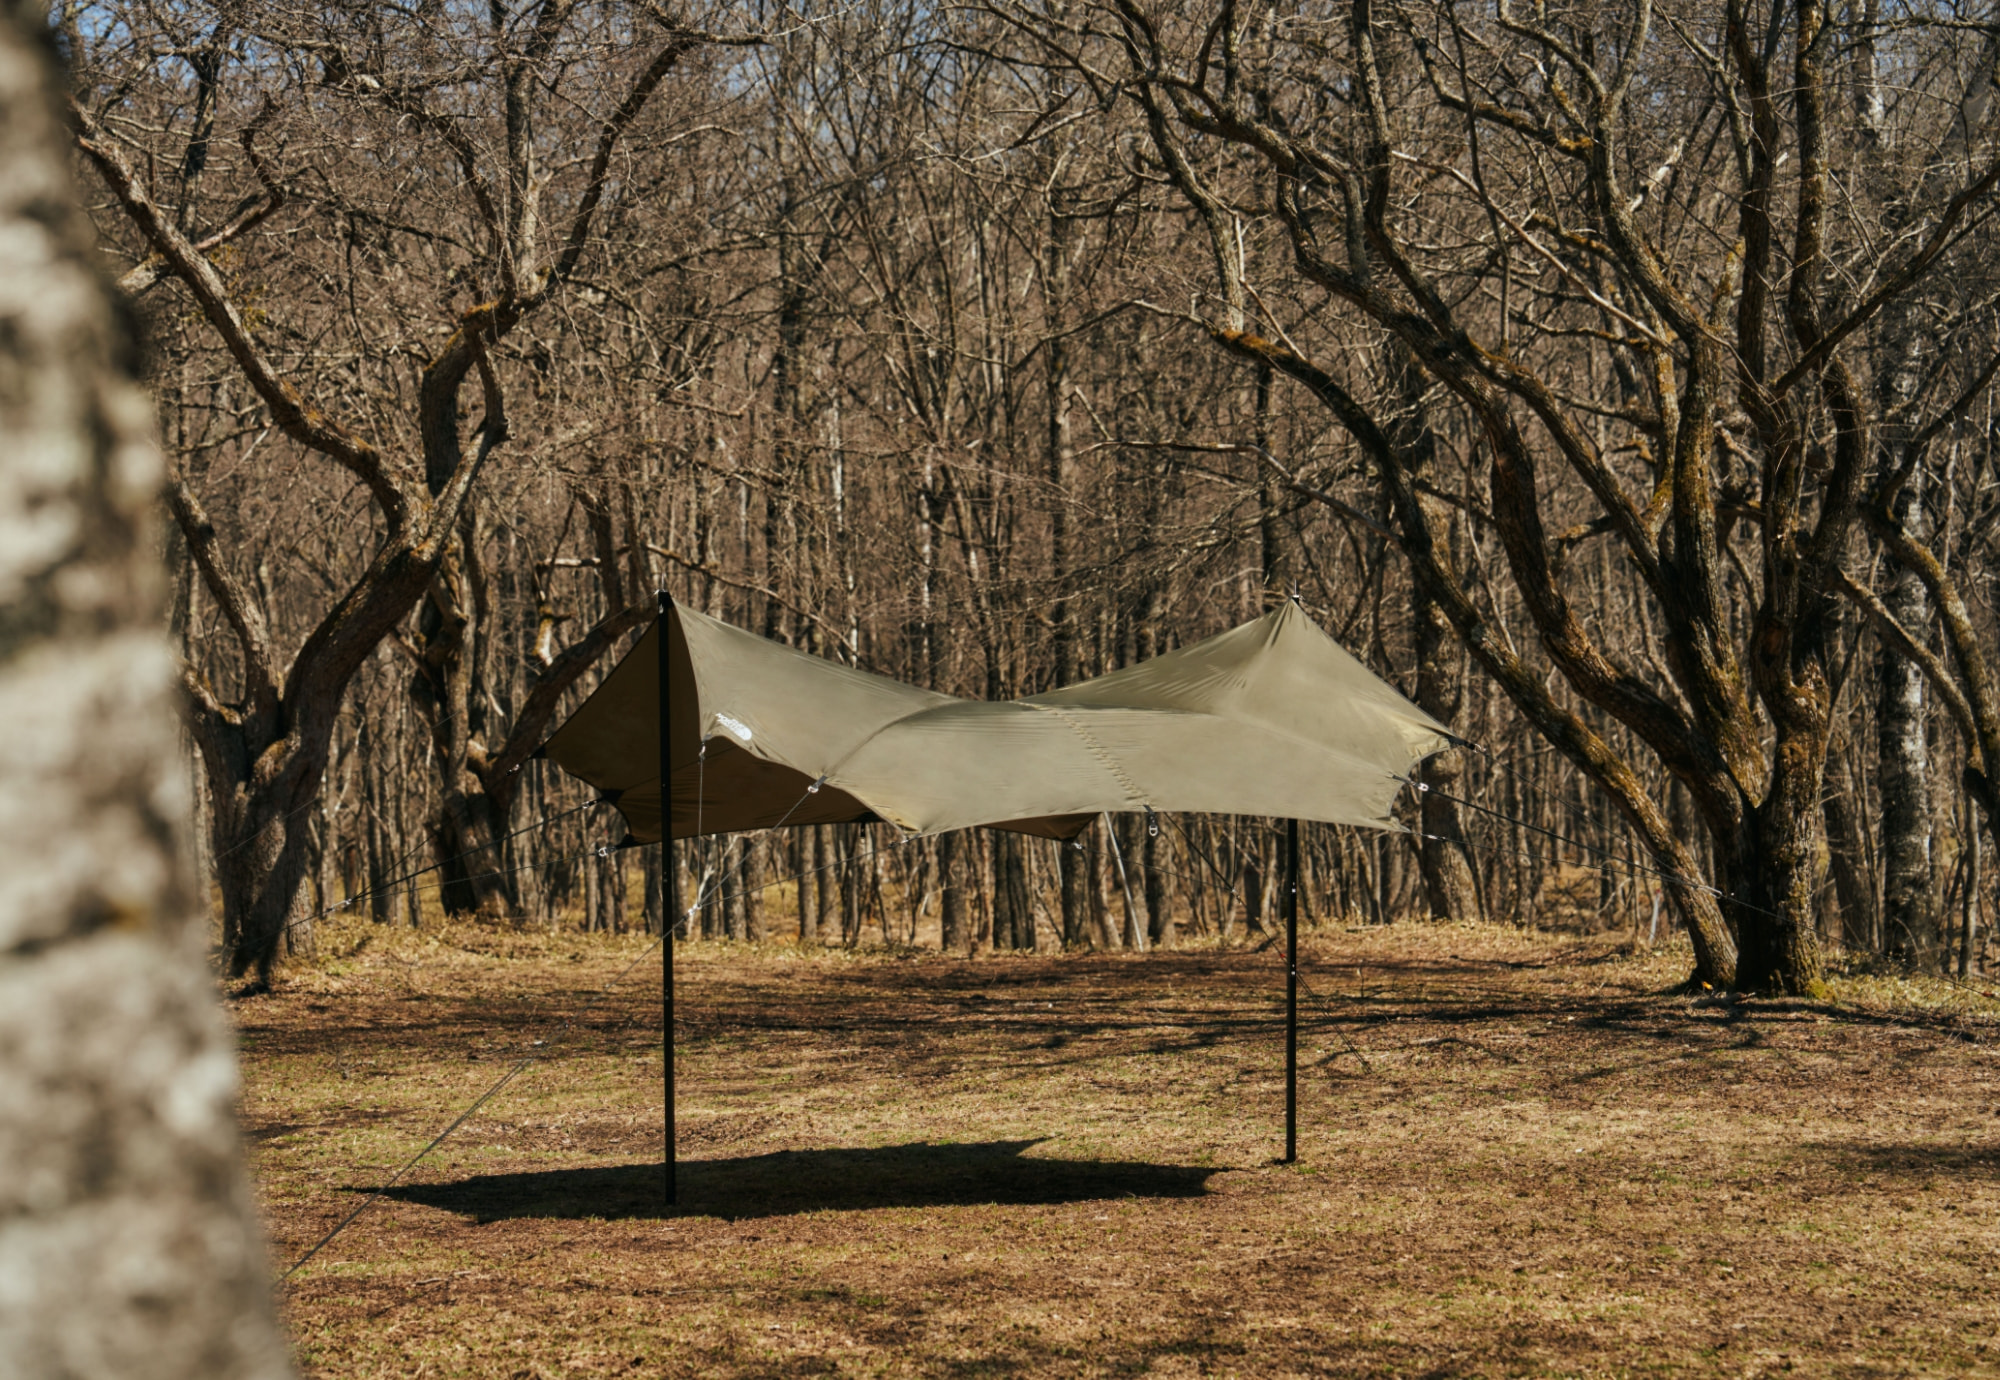 Nebula Tarp 2 | Online Camp Store | THE NORTH FACE CAMP